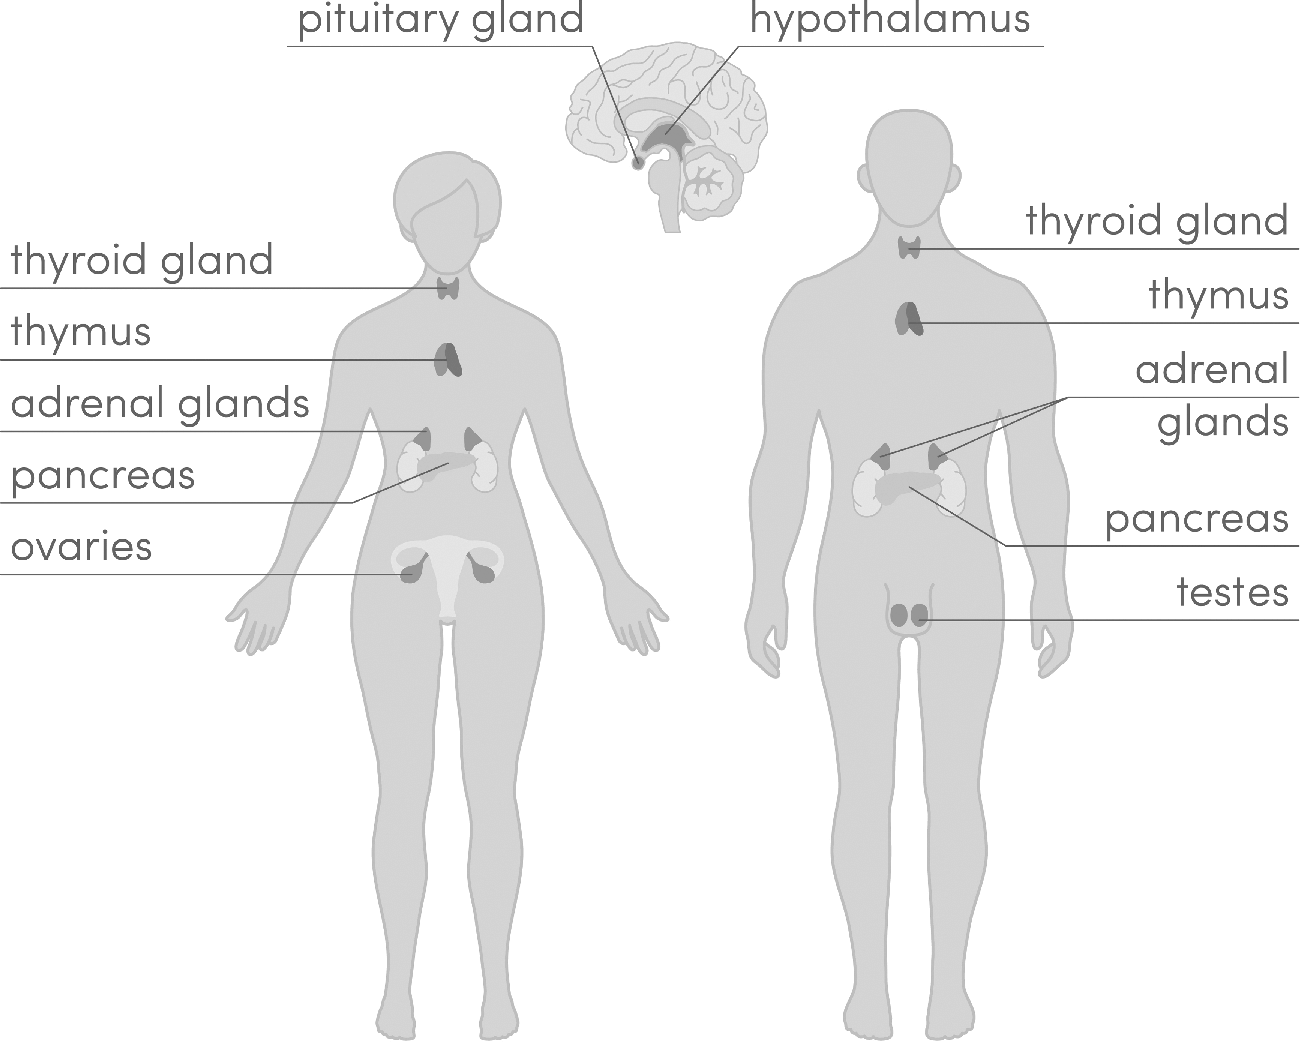 Figure 2.2 The endocrine system includes the hypothalamus and the pituitary gland in the brain